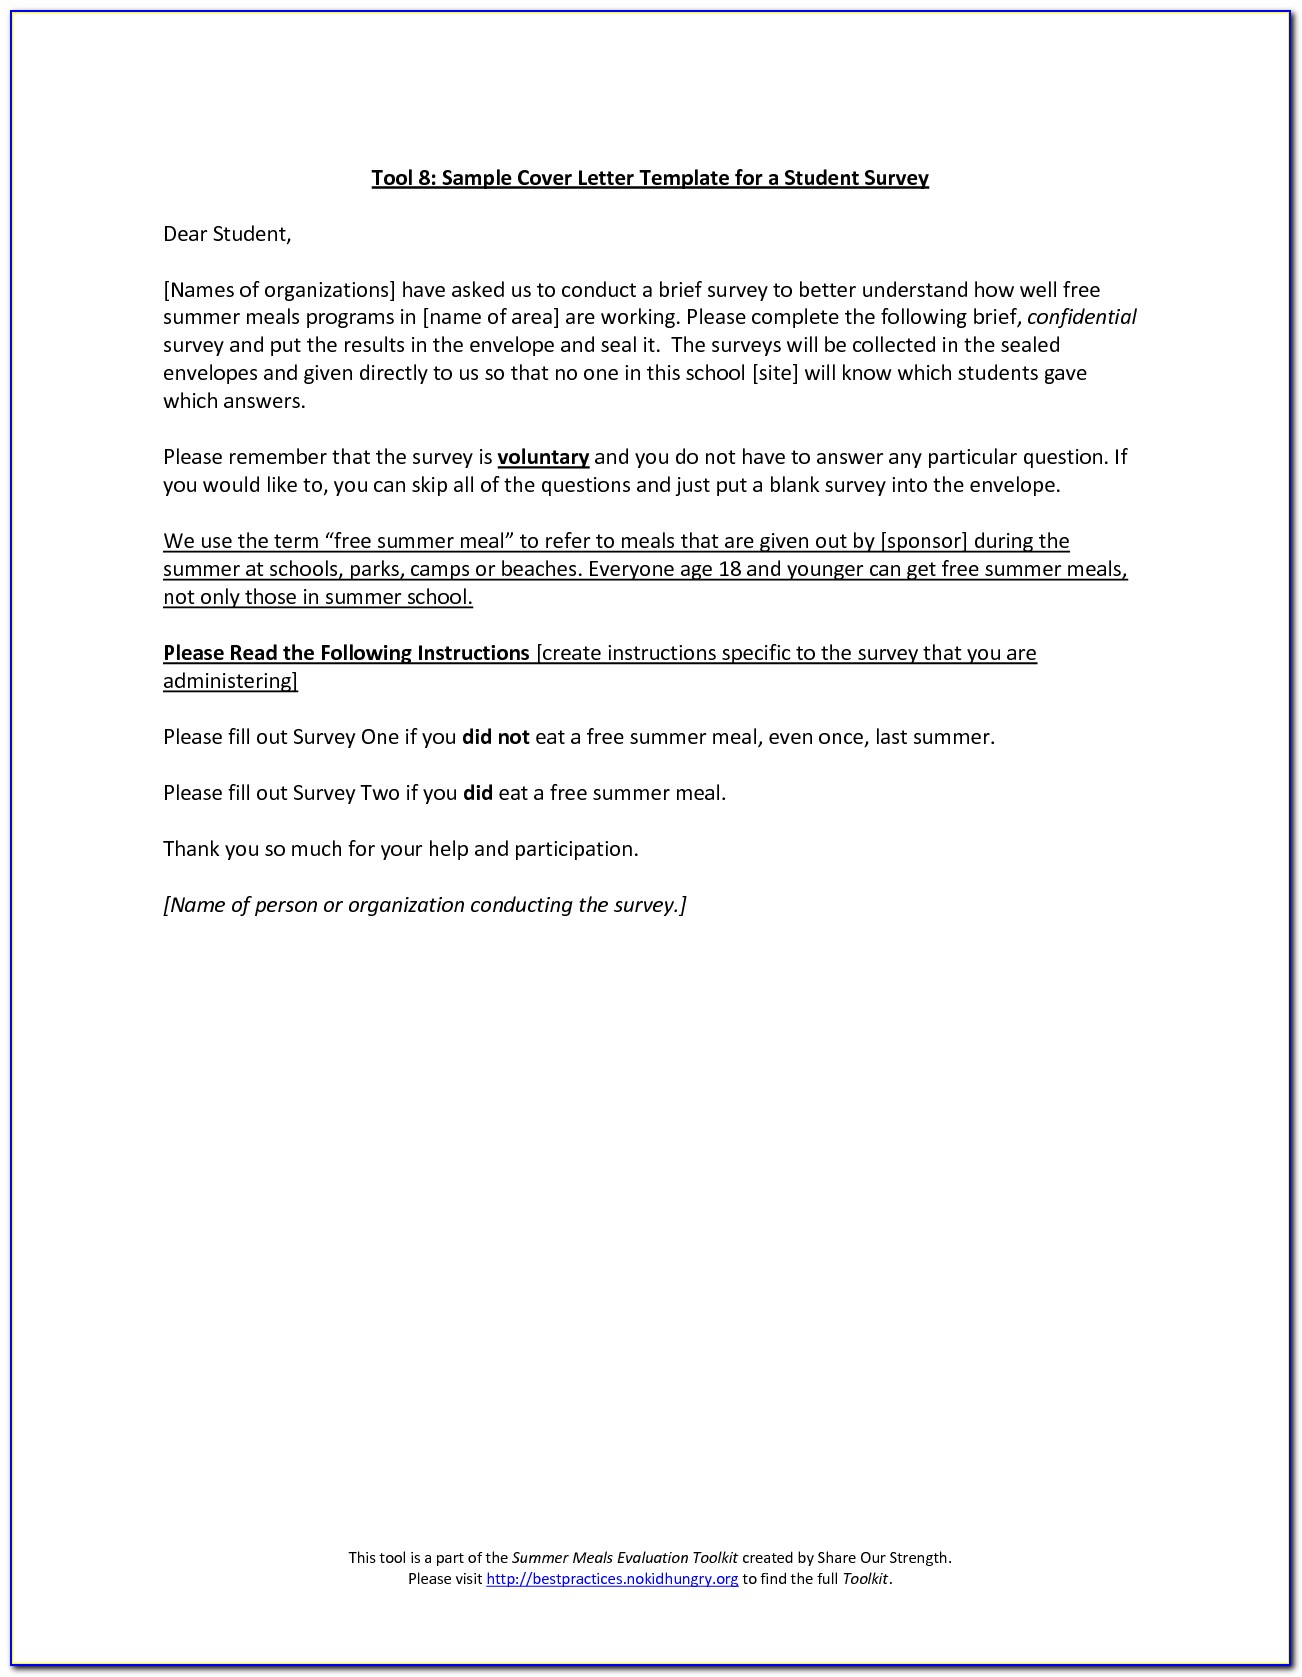 Customer Satisfaction Survey Cover Letter Template